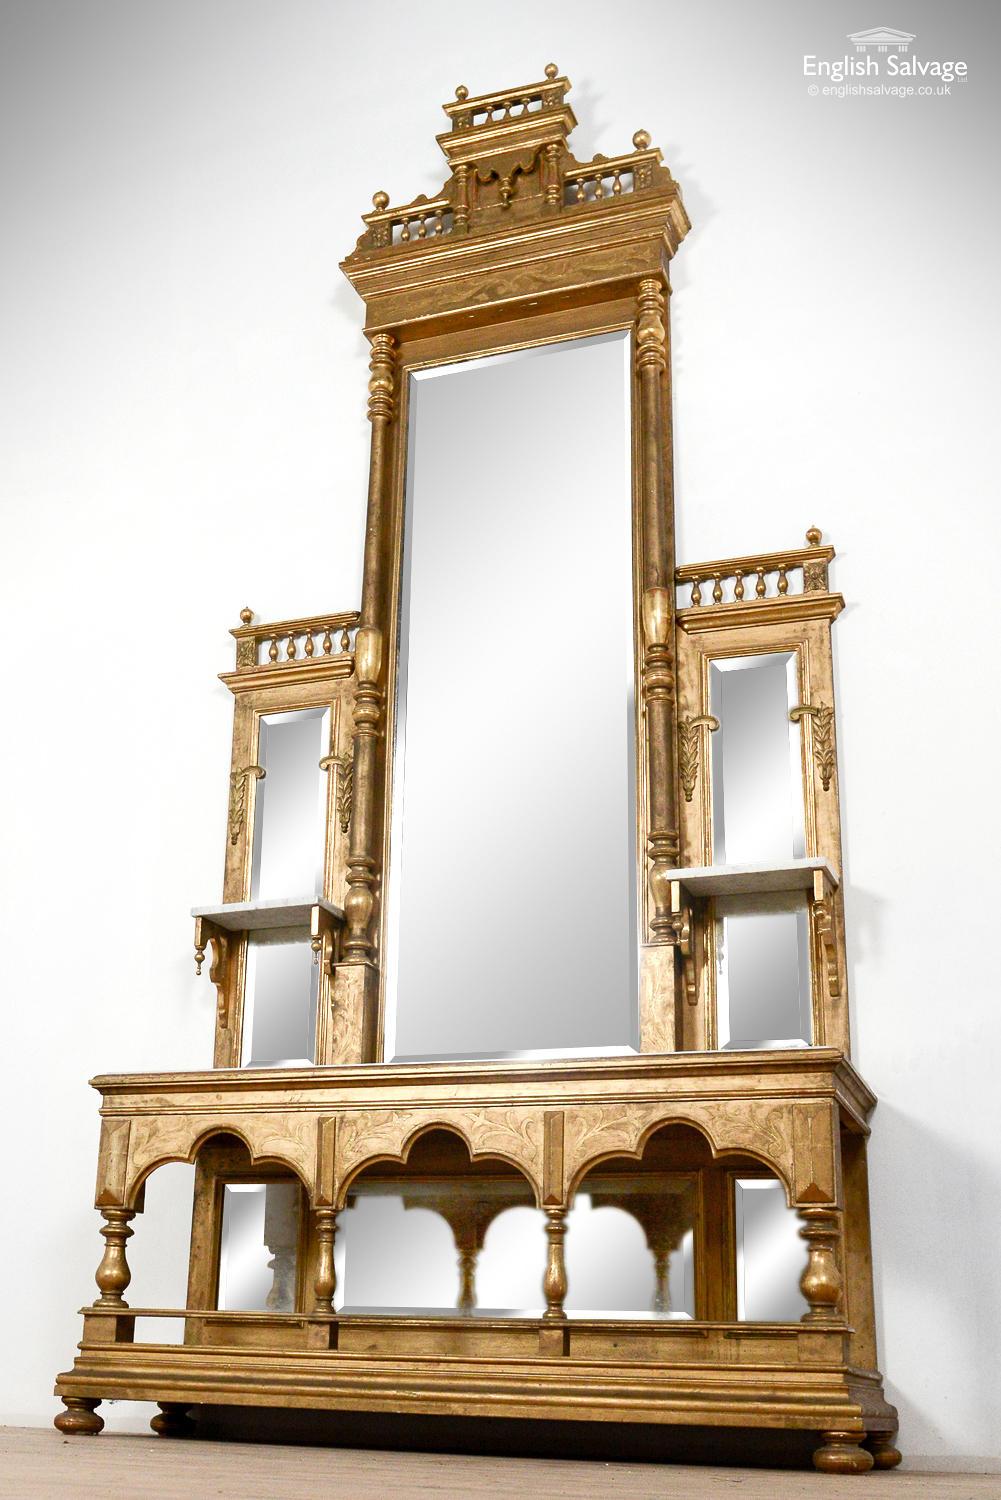 Impressive, antique mirrored sacristy dresser stand from late 1800s. Richly ornamented with marble shelves, decorative pilasters and finials, and foliate mouldings, it is a rare and high quality piece. Six beveled mirrors make up the back of the